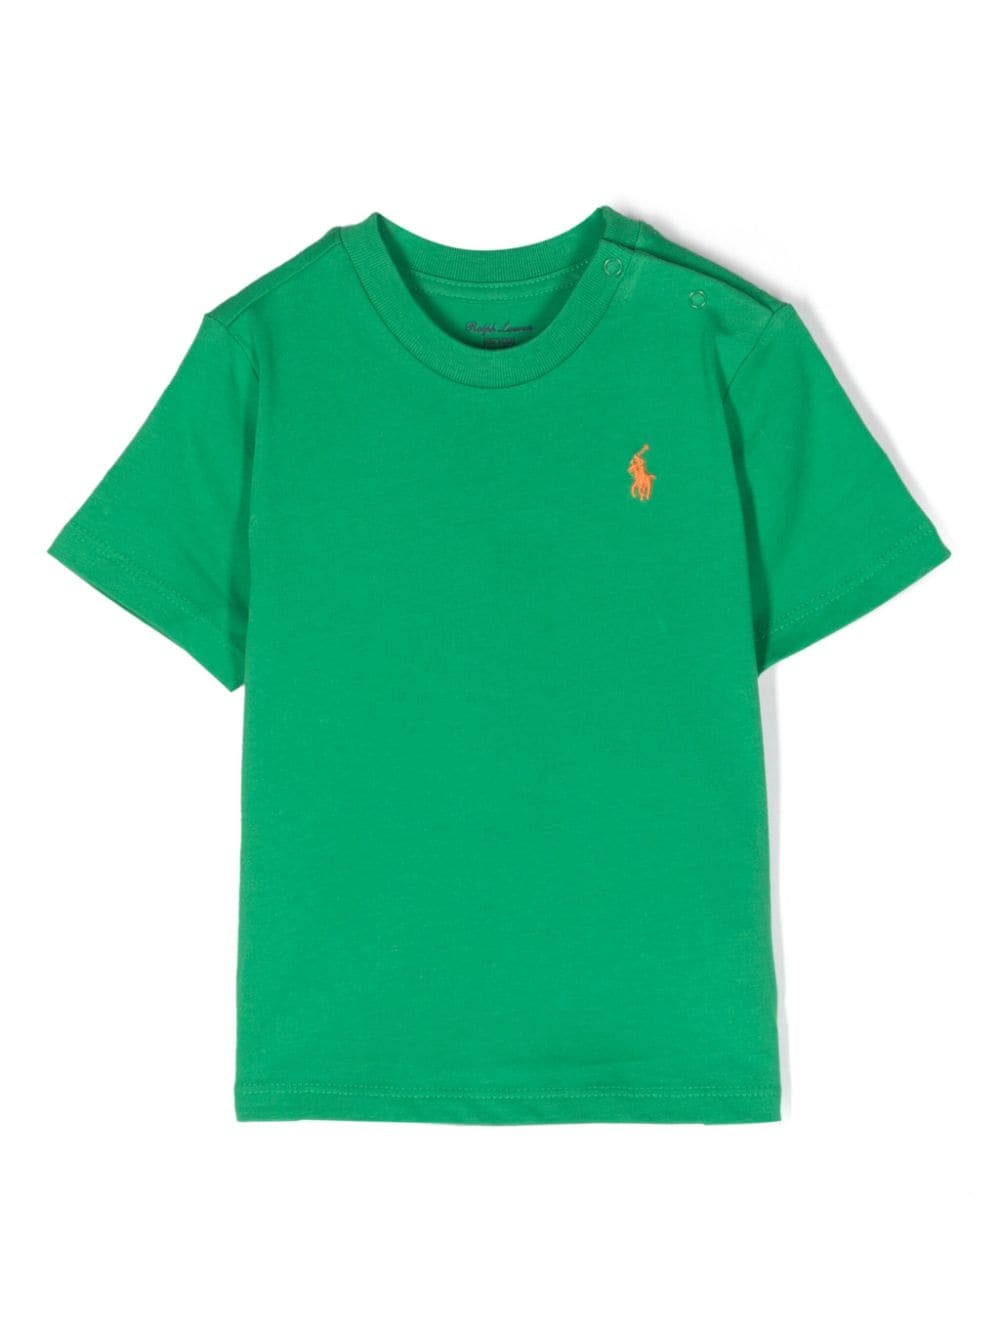 Green baby t-shirt with logo